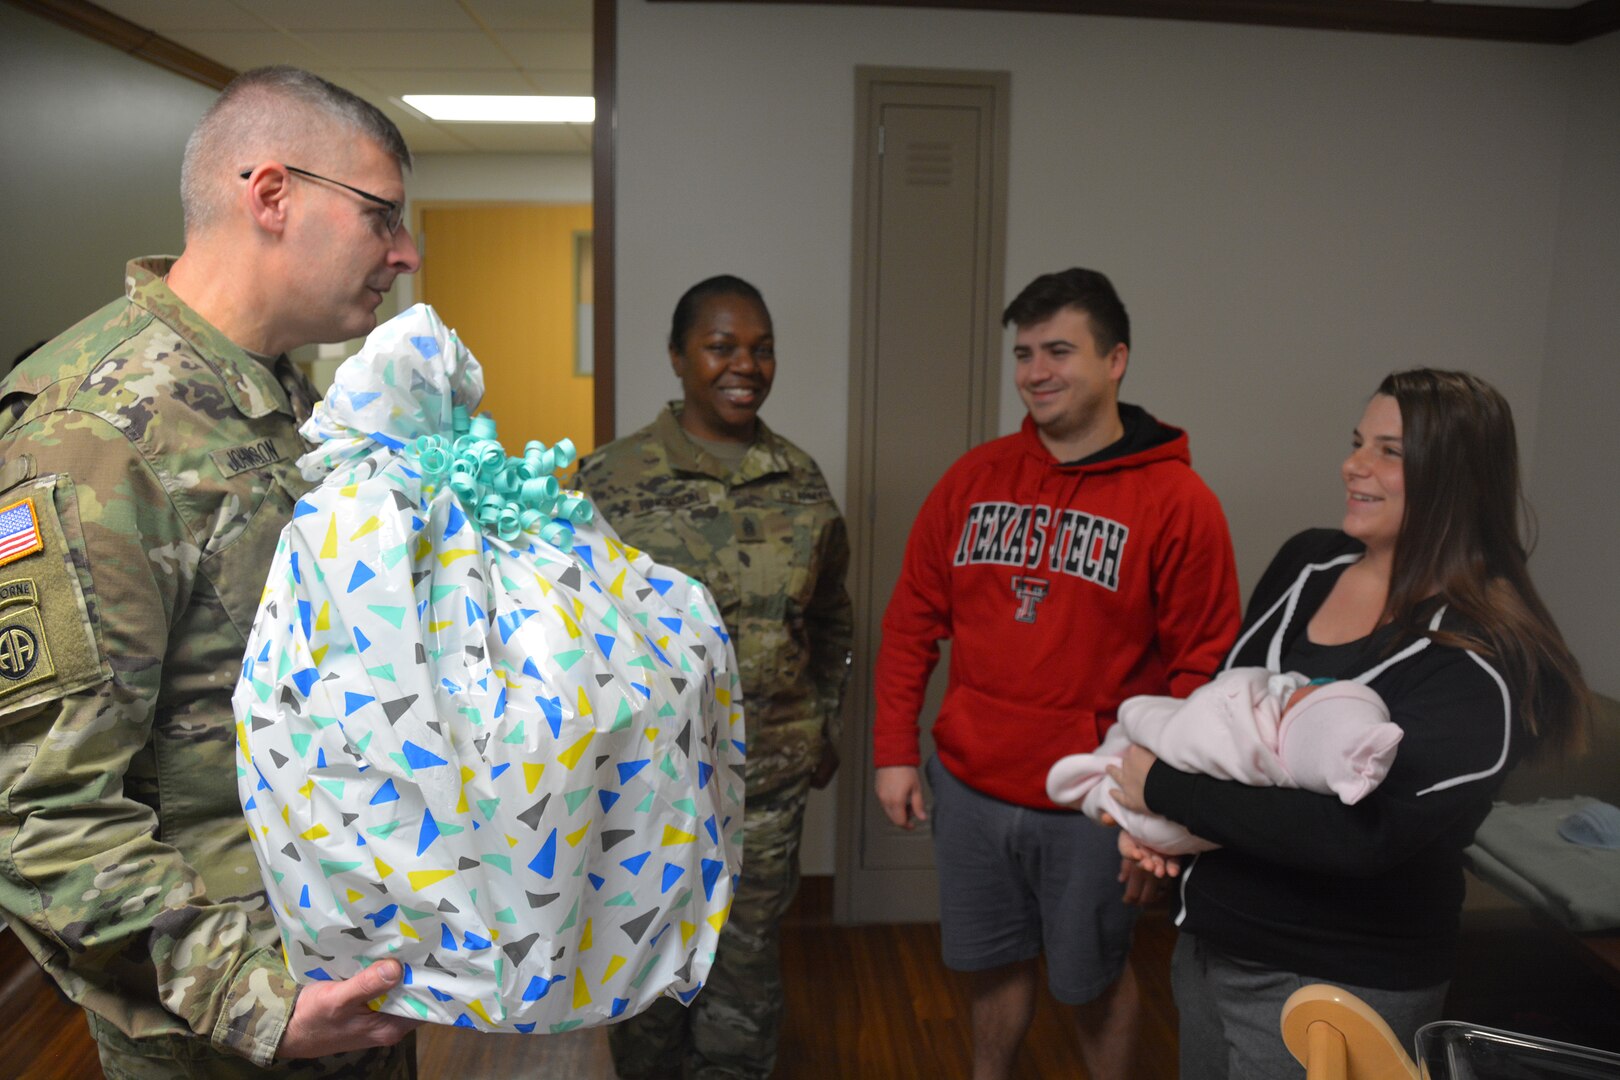 (From left) Brooke Army Medical Center commander Brig. Gen. Jeffrey Johnson and Warrior Transition Battalion Command Sgt. Maj. Karen Hinckson deliver a gift basket to Petty Officer 1st Class Dylan Pendleton, his wife, Rachel, and baby, Violet. Violet was BAMC's first baby in the New Year, born Jan. 1, 2018 at 2:27 a.m.